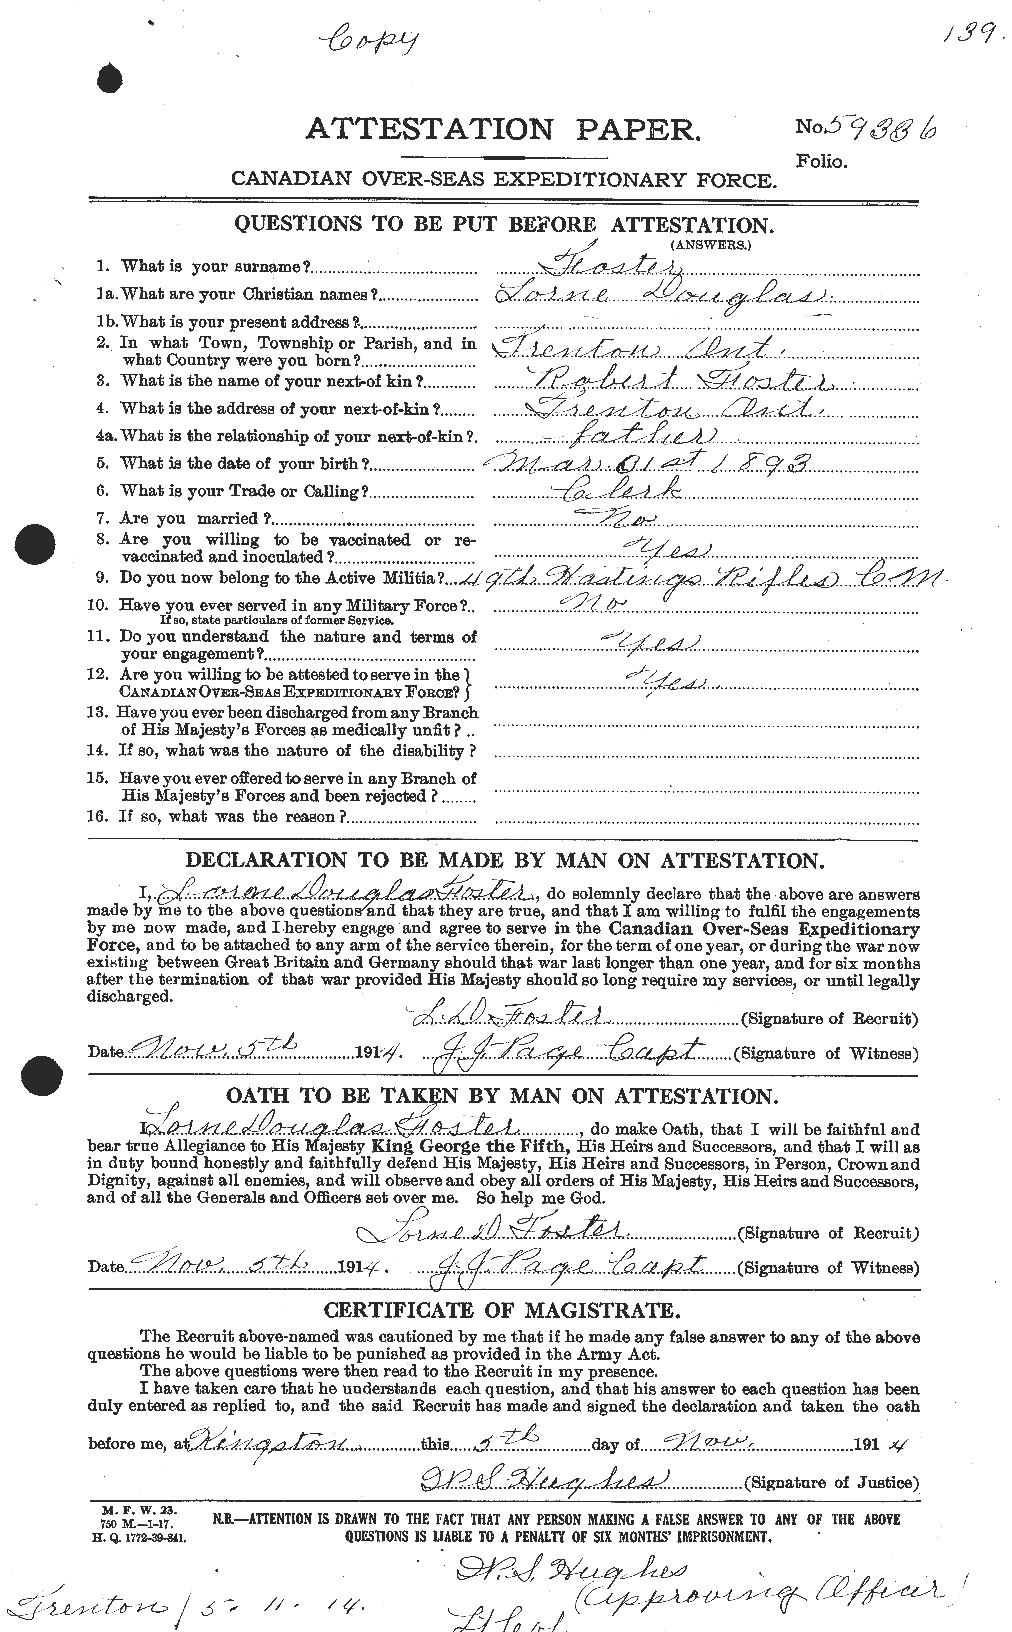 Personnel Records of the First World War - CEF 333410a